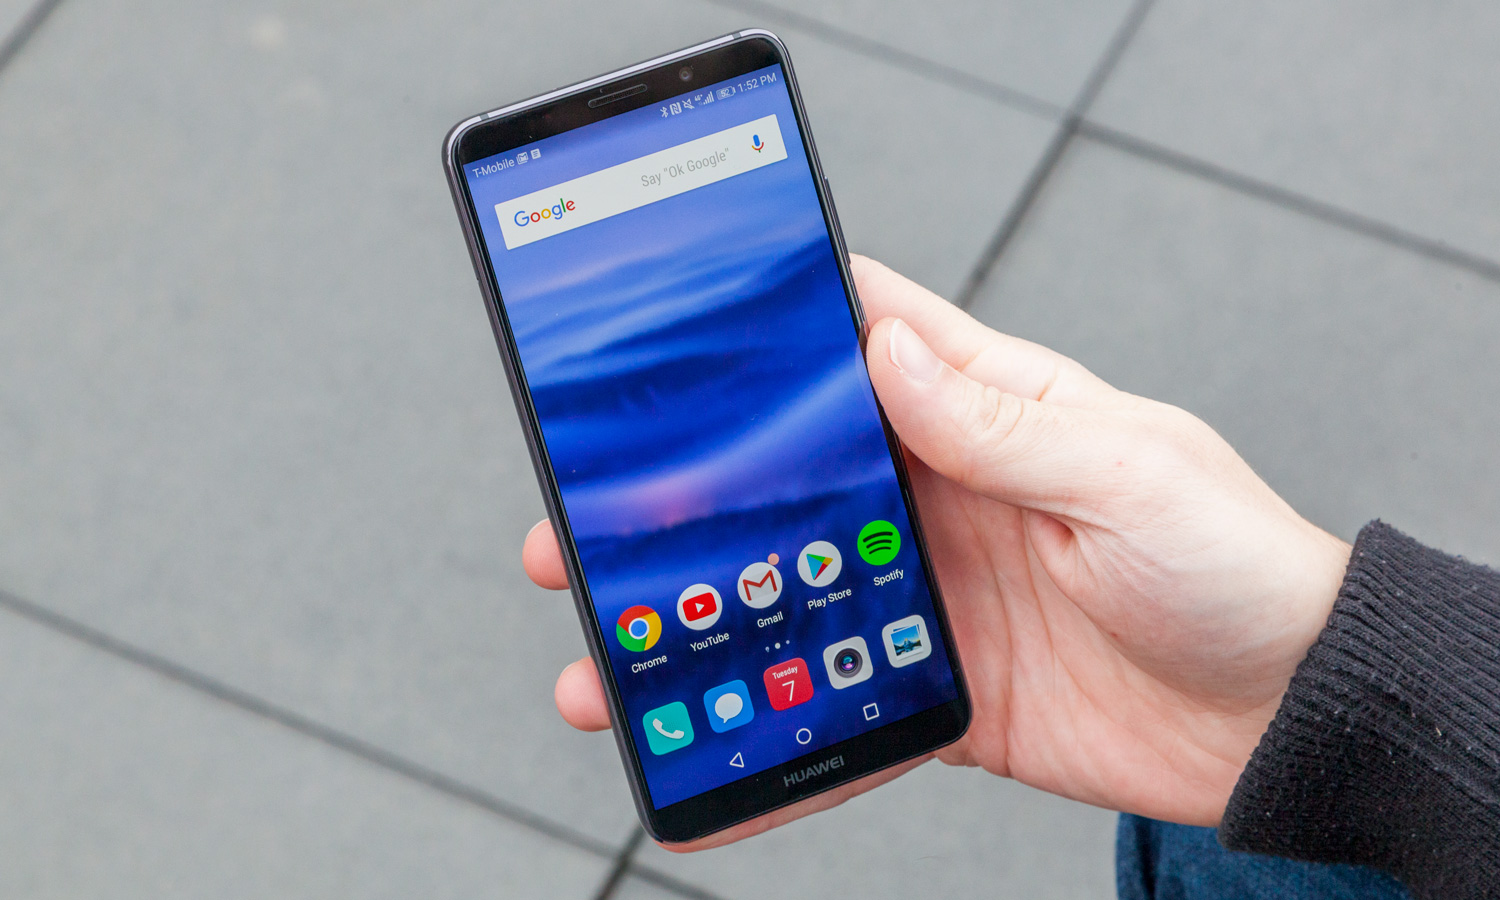 Huawei Mate 10 Pro Review: Smart Epic Battery Life | Tom's Guide